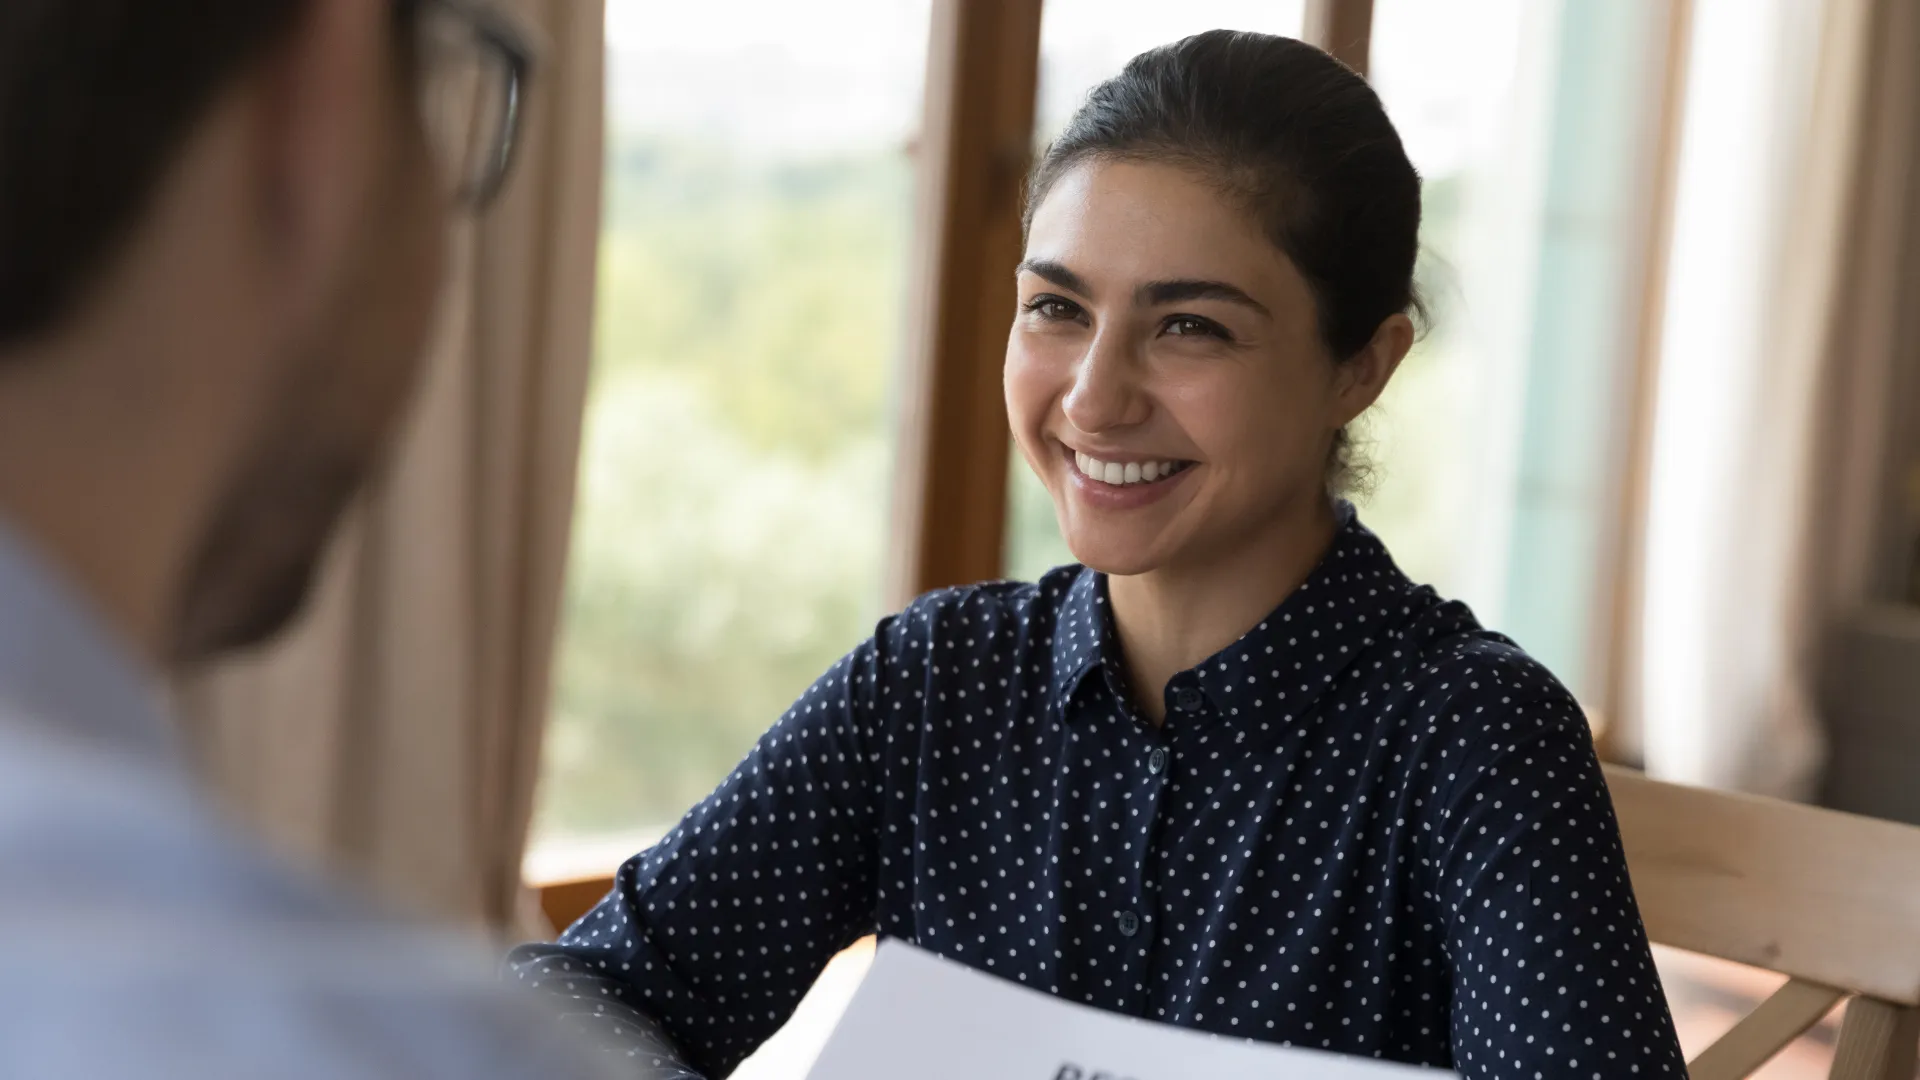 A smiling young woman participates in an in-person job interview